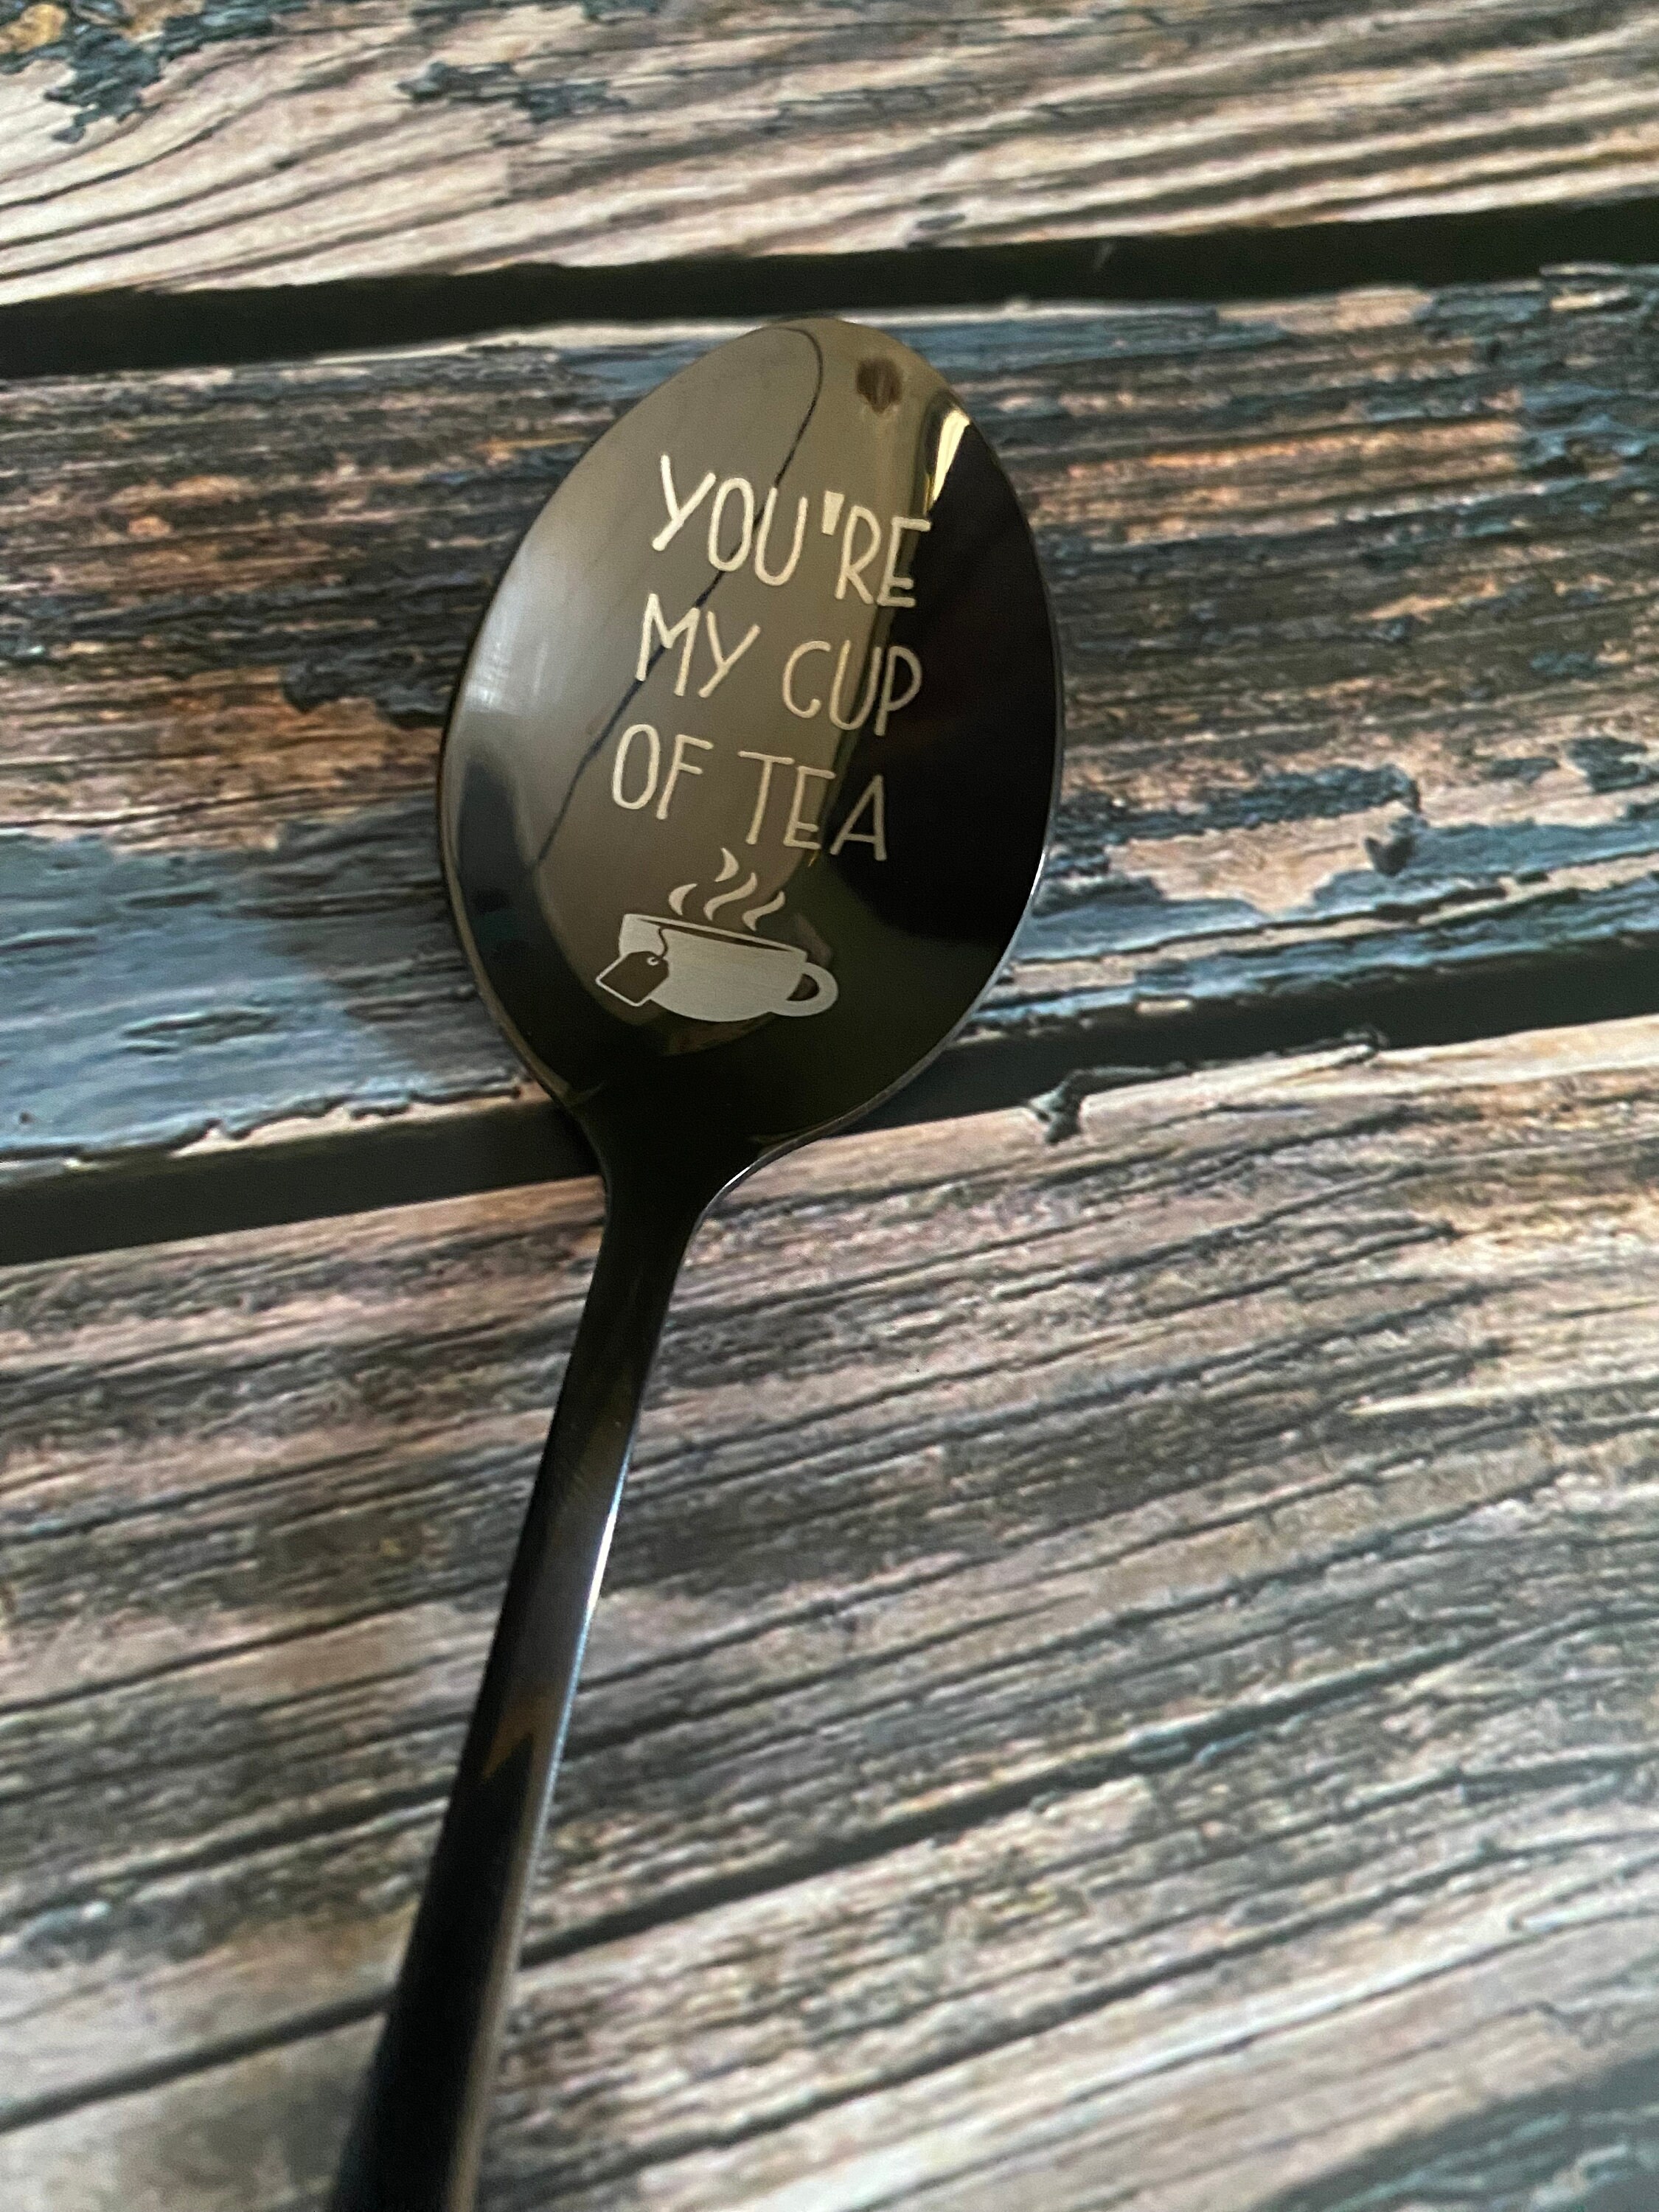 HappyBeeCo My Peanut Butter Spoon Hand Stamped Spoon Foodie  Spoon Gift Peanut Butter Spoon Gift Tablespoon Spoon Desserts Vegan Gift  Best Friends Gift Spoon With Sayings: Spoons